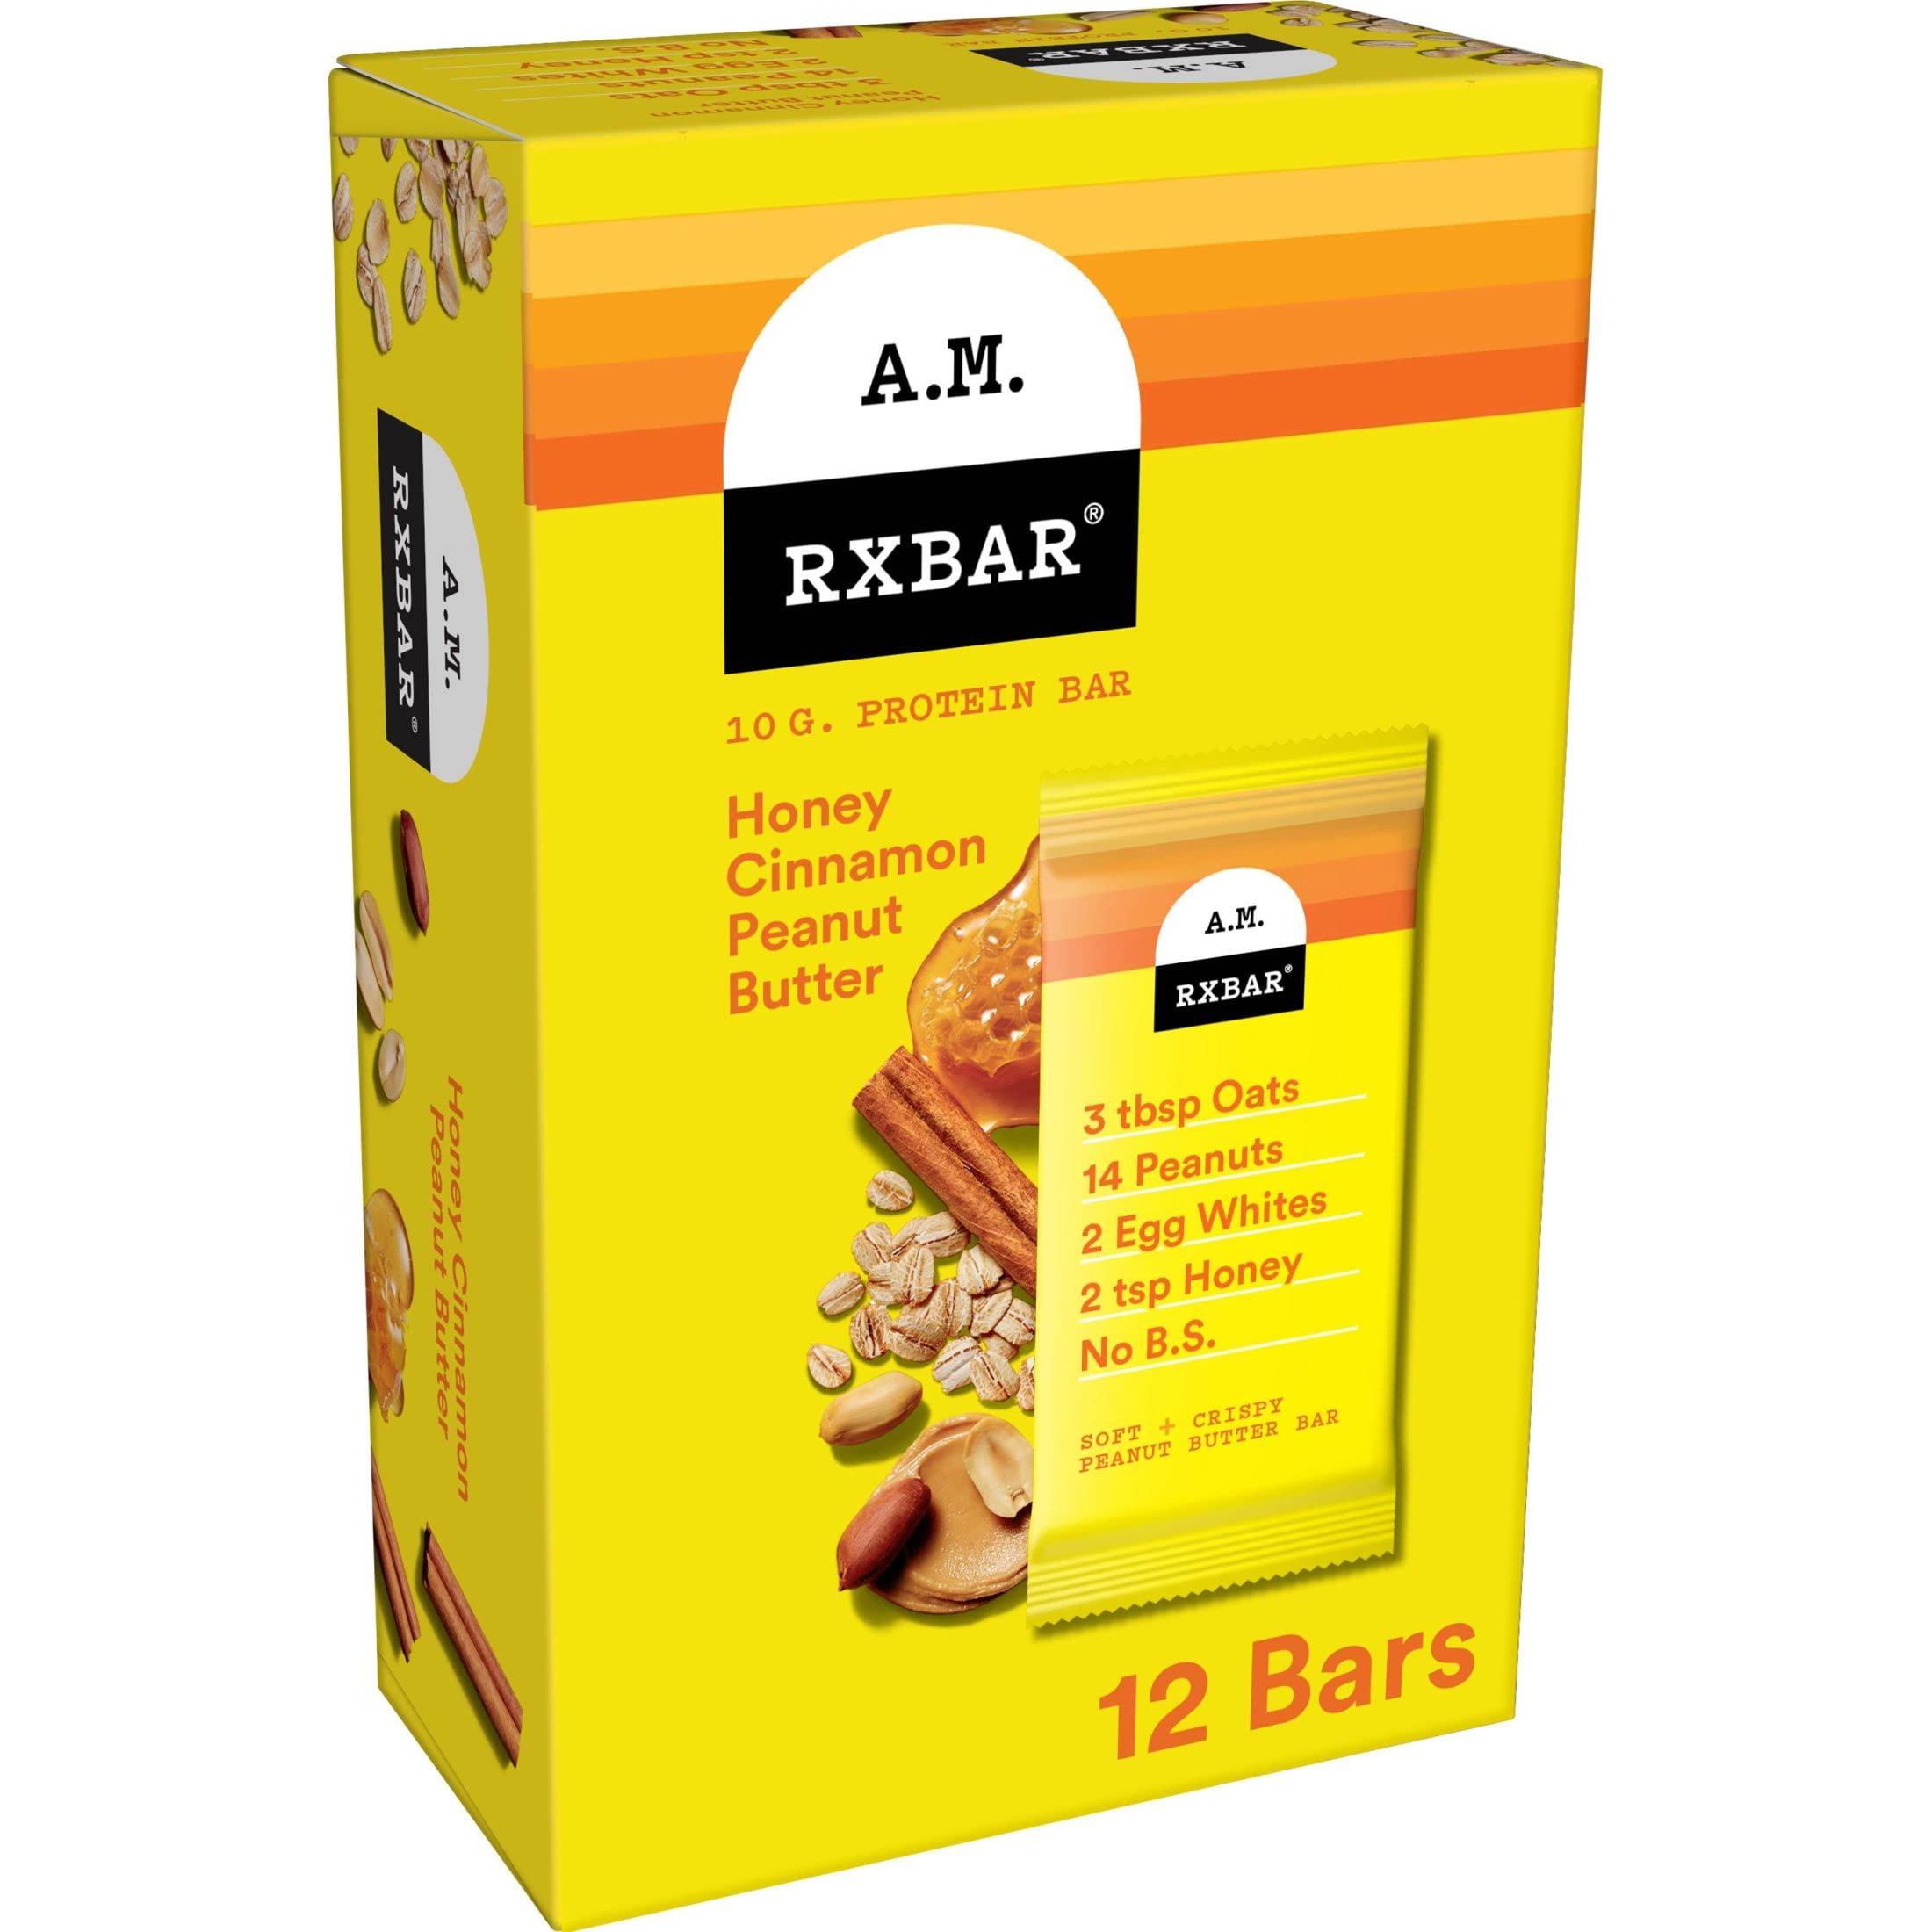 12-Count 1.9-Oz RXBAR A.M. Protein Bars (Honey Cinnamon Peanut Butter) $16.07 ($1.34 Ea) w/ S&S + Free Shipping w/ Prime or on $35+